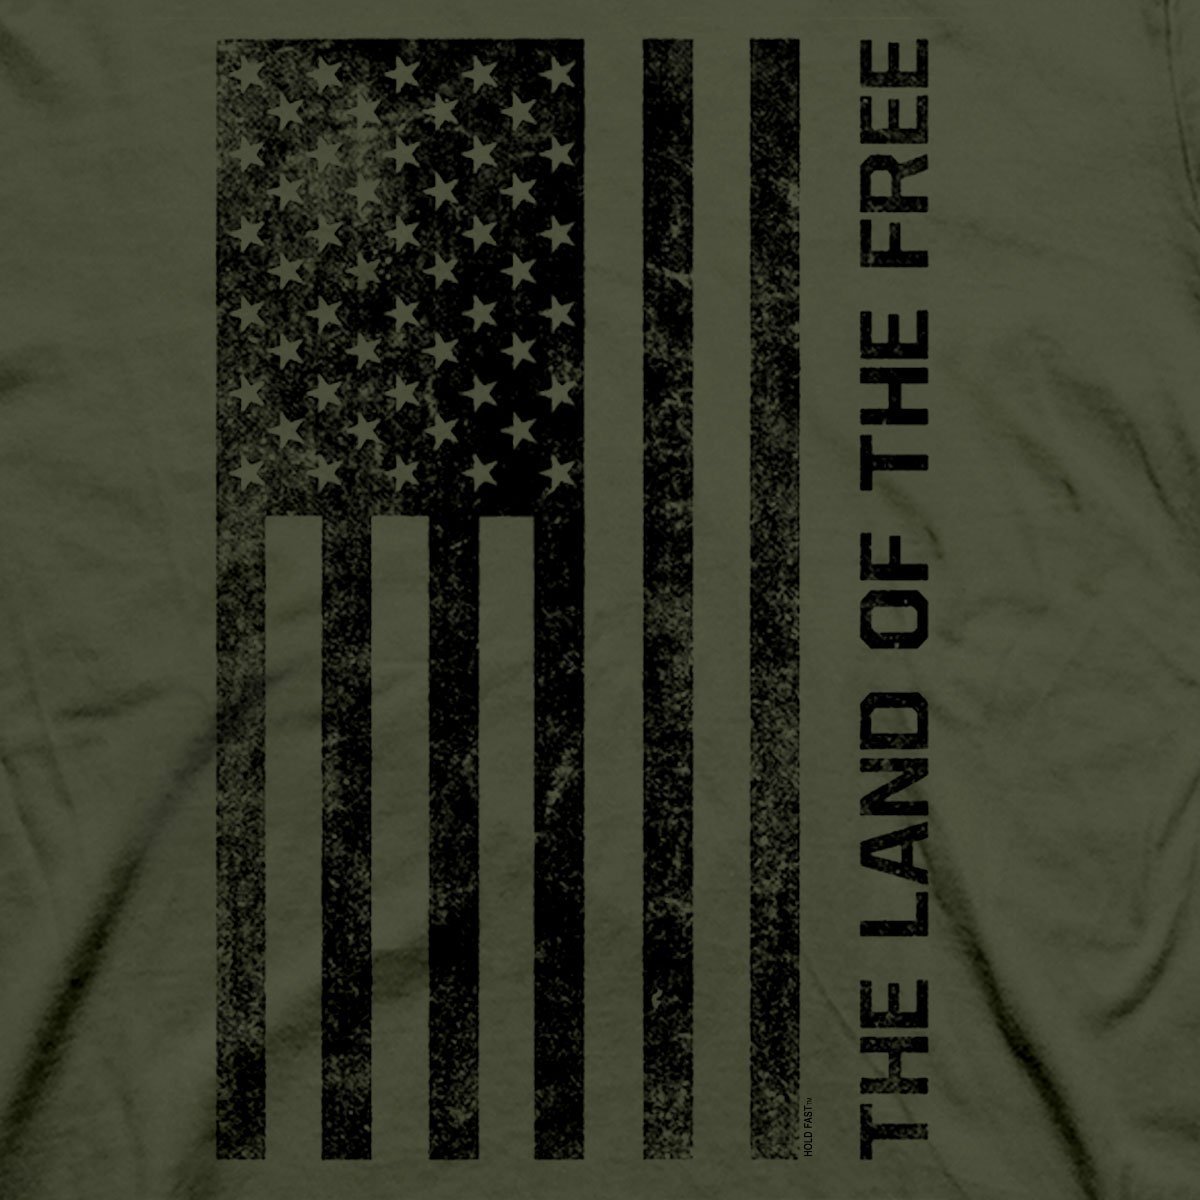 Wrap your love of country around you in this “Freedom Flag” T-shirt by Hold Fast™ in City Green. This image calls to mind John 15:13, where we are told that there is no greater love than for one to lay down his life for his friends. Of course, the beauty of this verse is that it reminds us of fallen friends and family, with the backdrop of Christ Himself! His ultimate, eternal sacrifice is the best flag we can rally around. front view